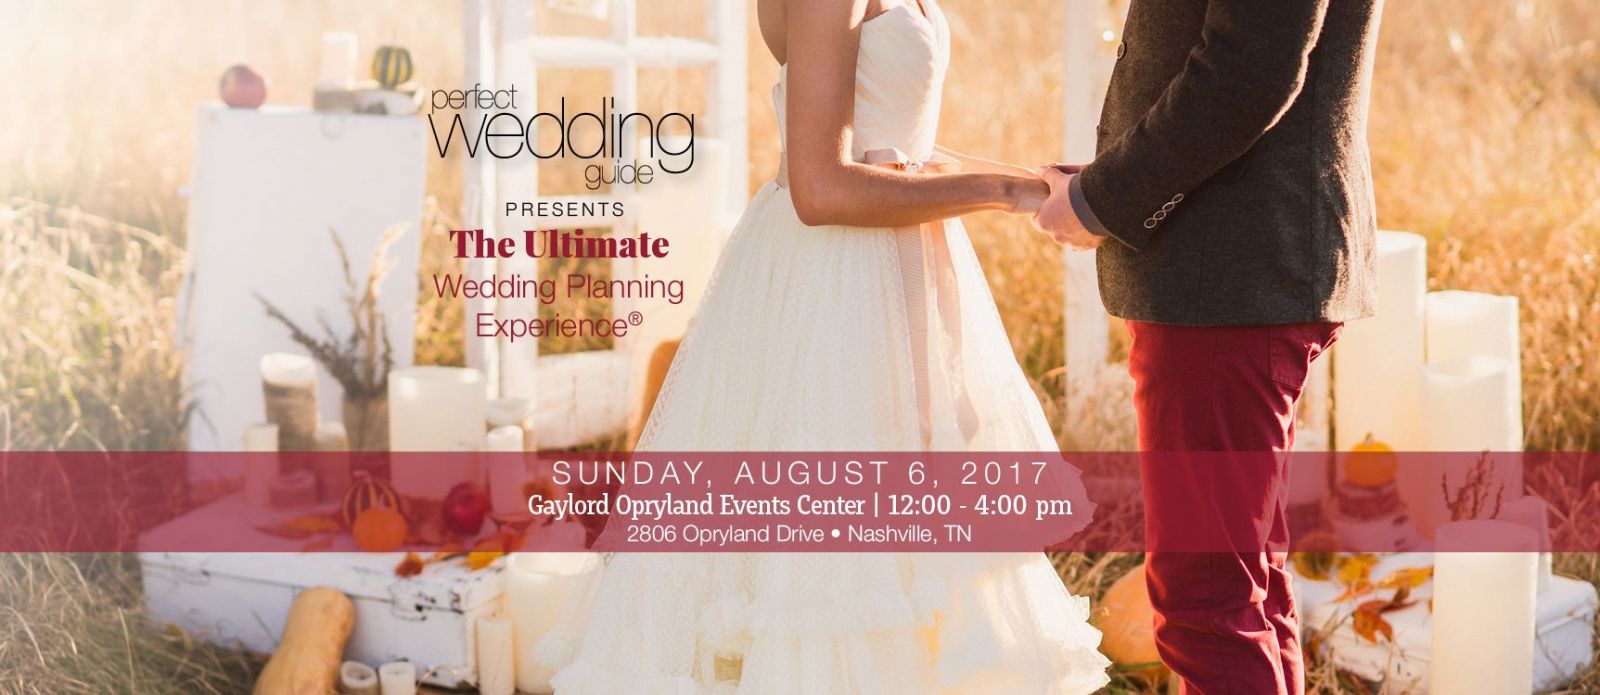 Come to the Perfect Wedding Guide Bridal Show on August 6th at Opryland |  Contests/Deals